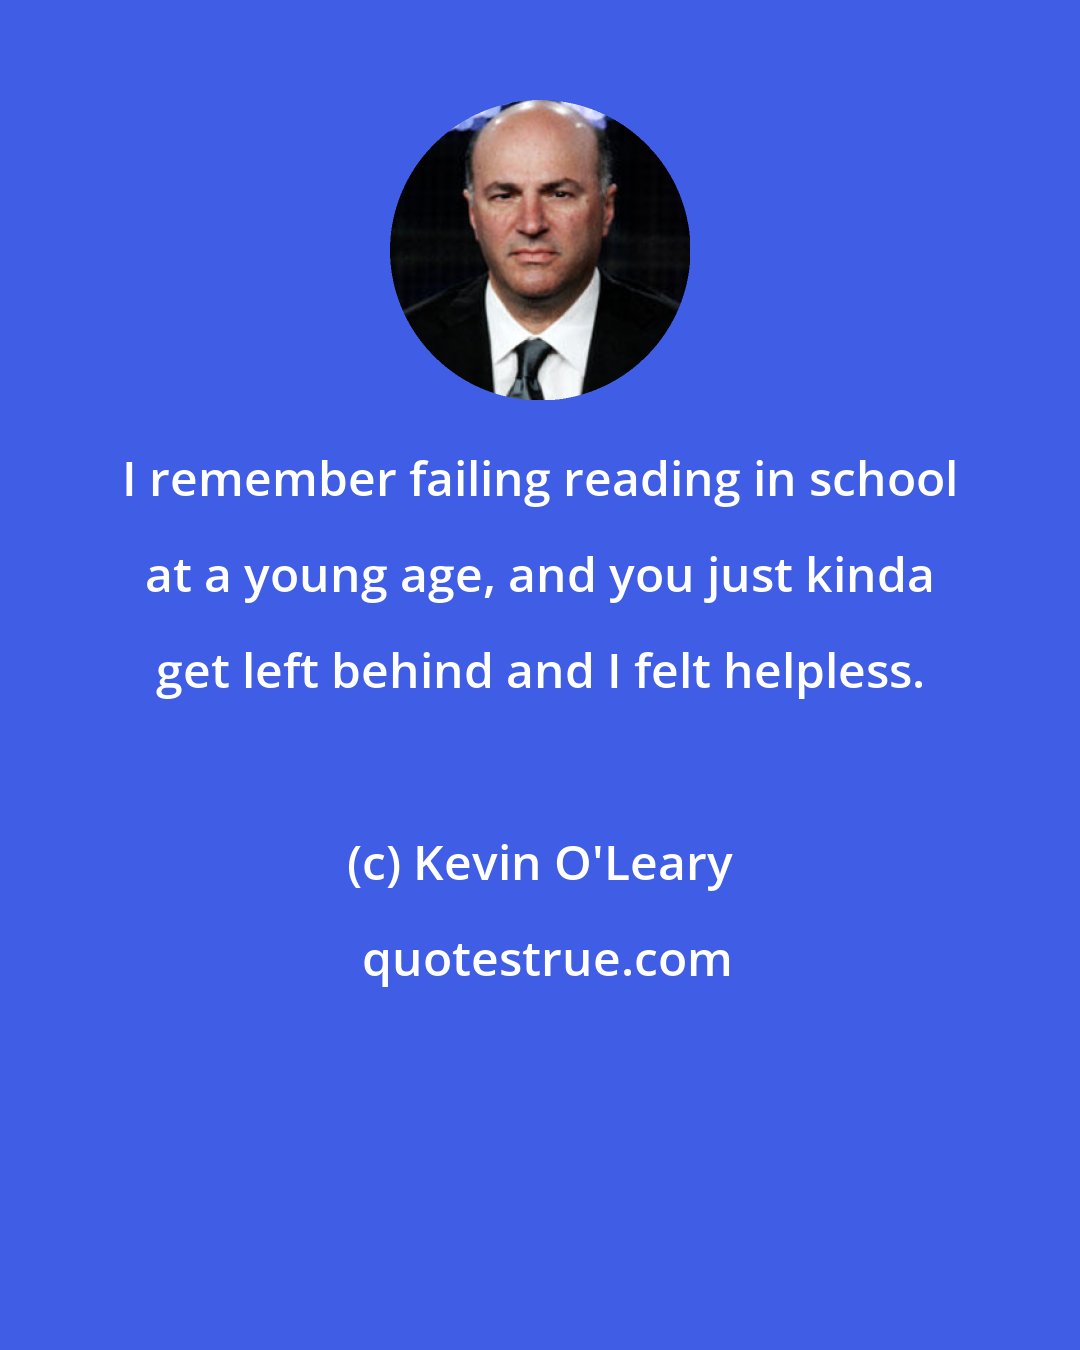 Kevin O'Leary: I remember failing reading in school at a young age, and you just kinda get left behind and I felt helpless.